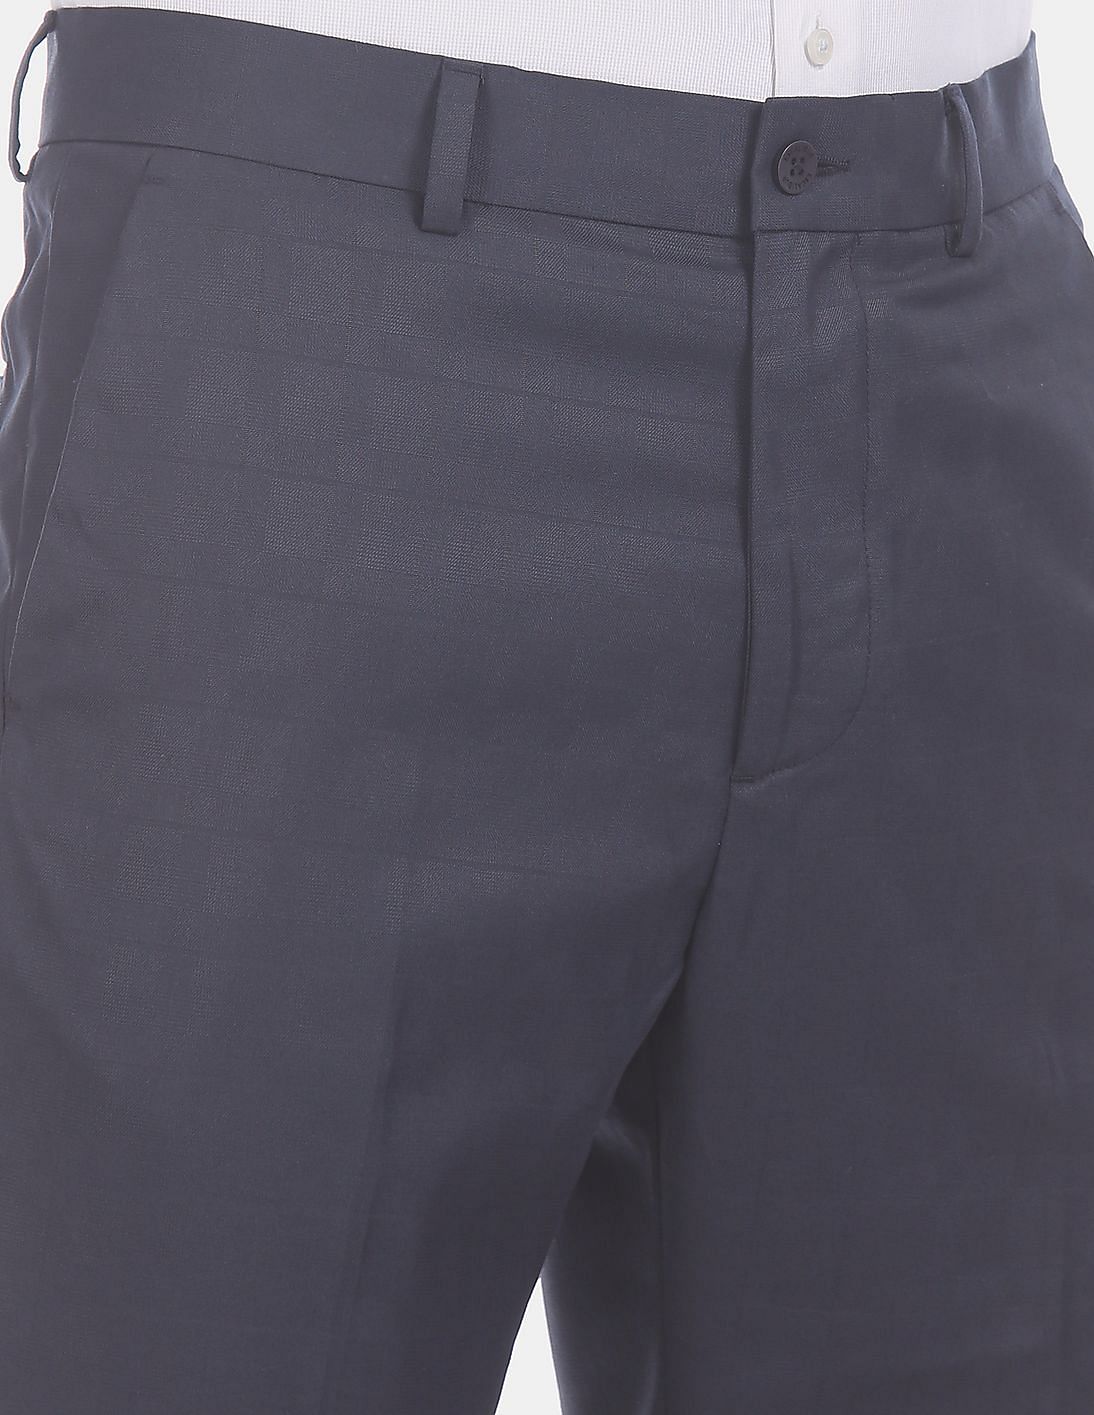 Buy Excalibur Brown Flat Front Trousers for Men Online @ Tata CLiQ